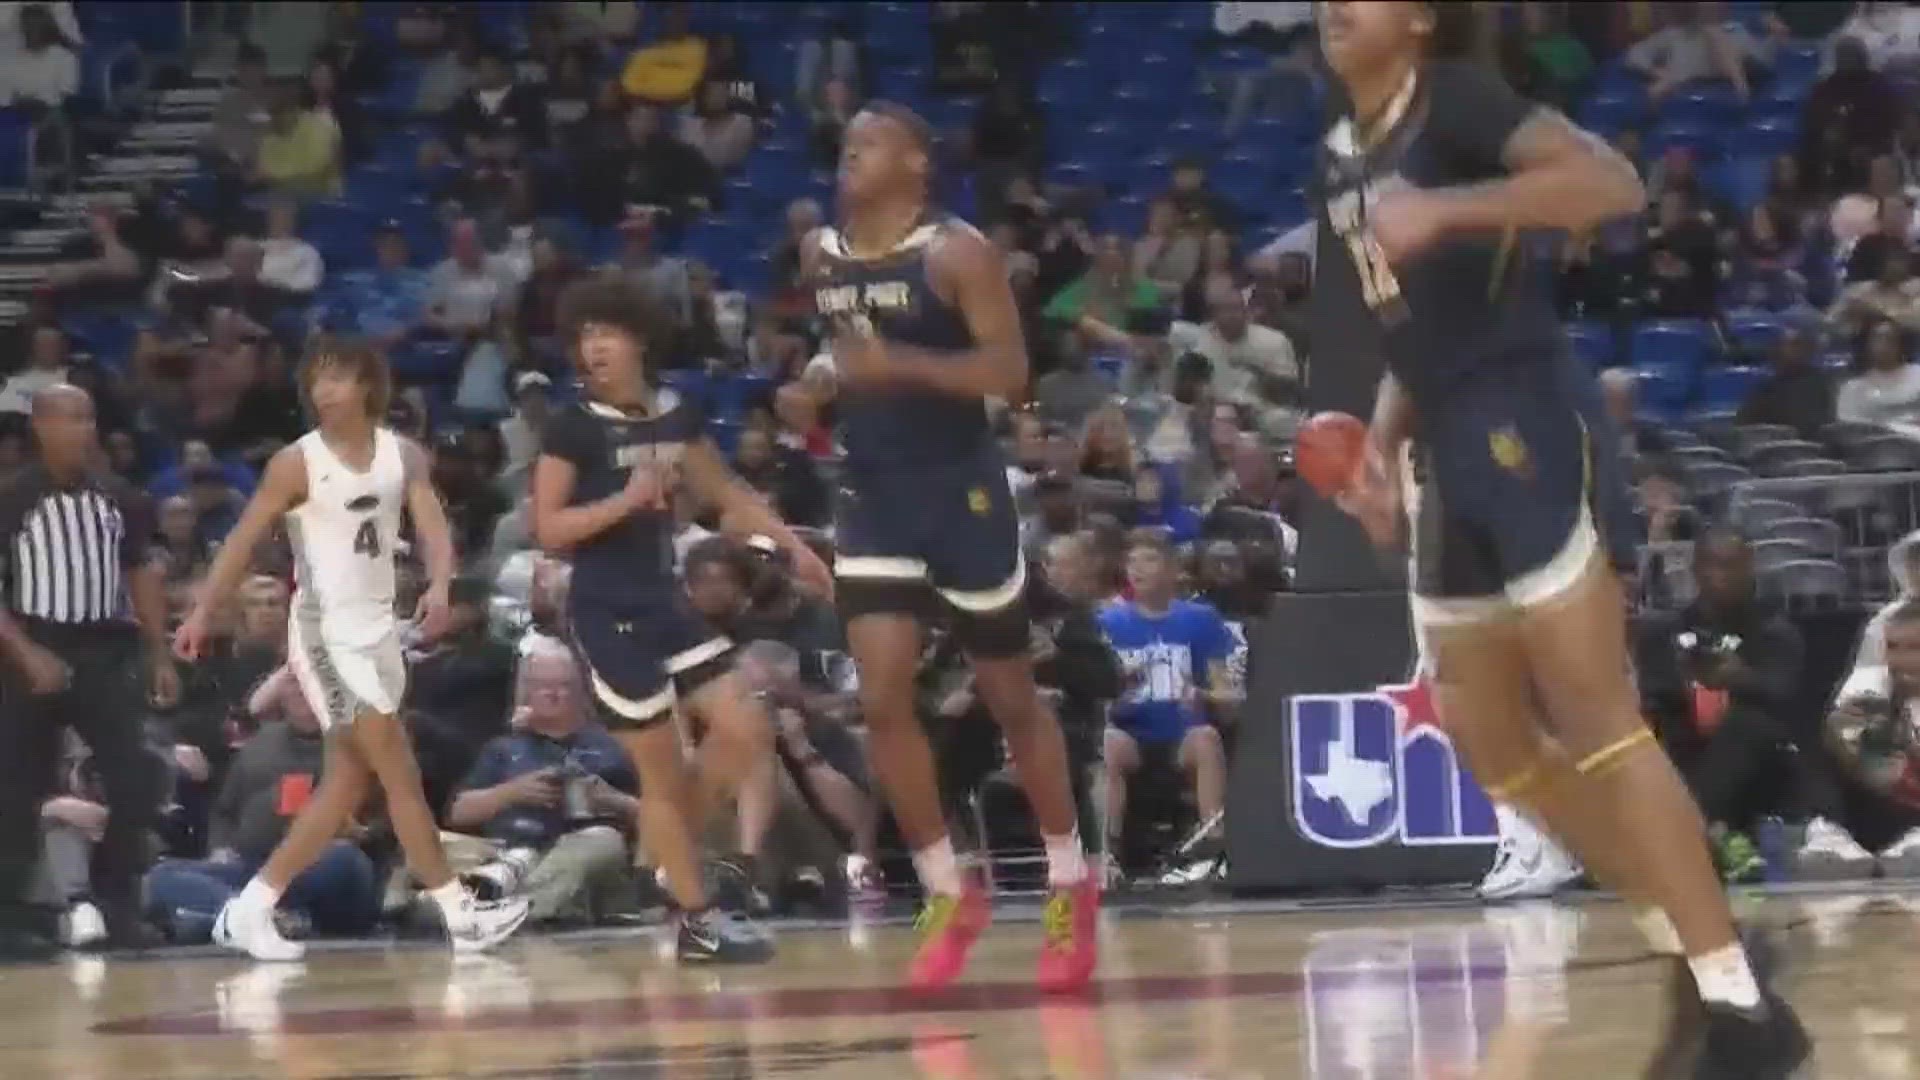 The No. 2 Stony Point boys basketball team (38-2) fell to No. 1 Plano East (40-0), 53-41, in the UIL 6A State Championship game Saturday night.